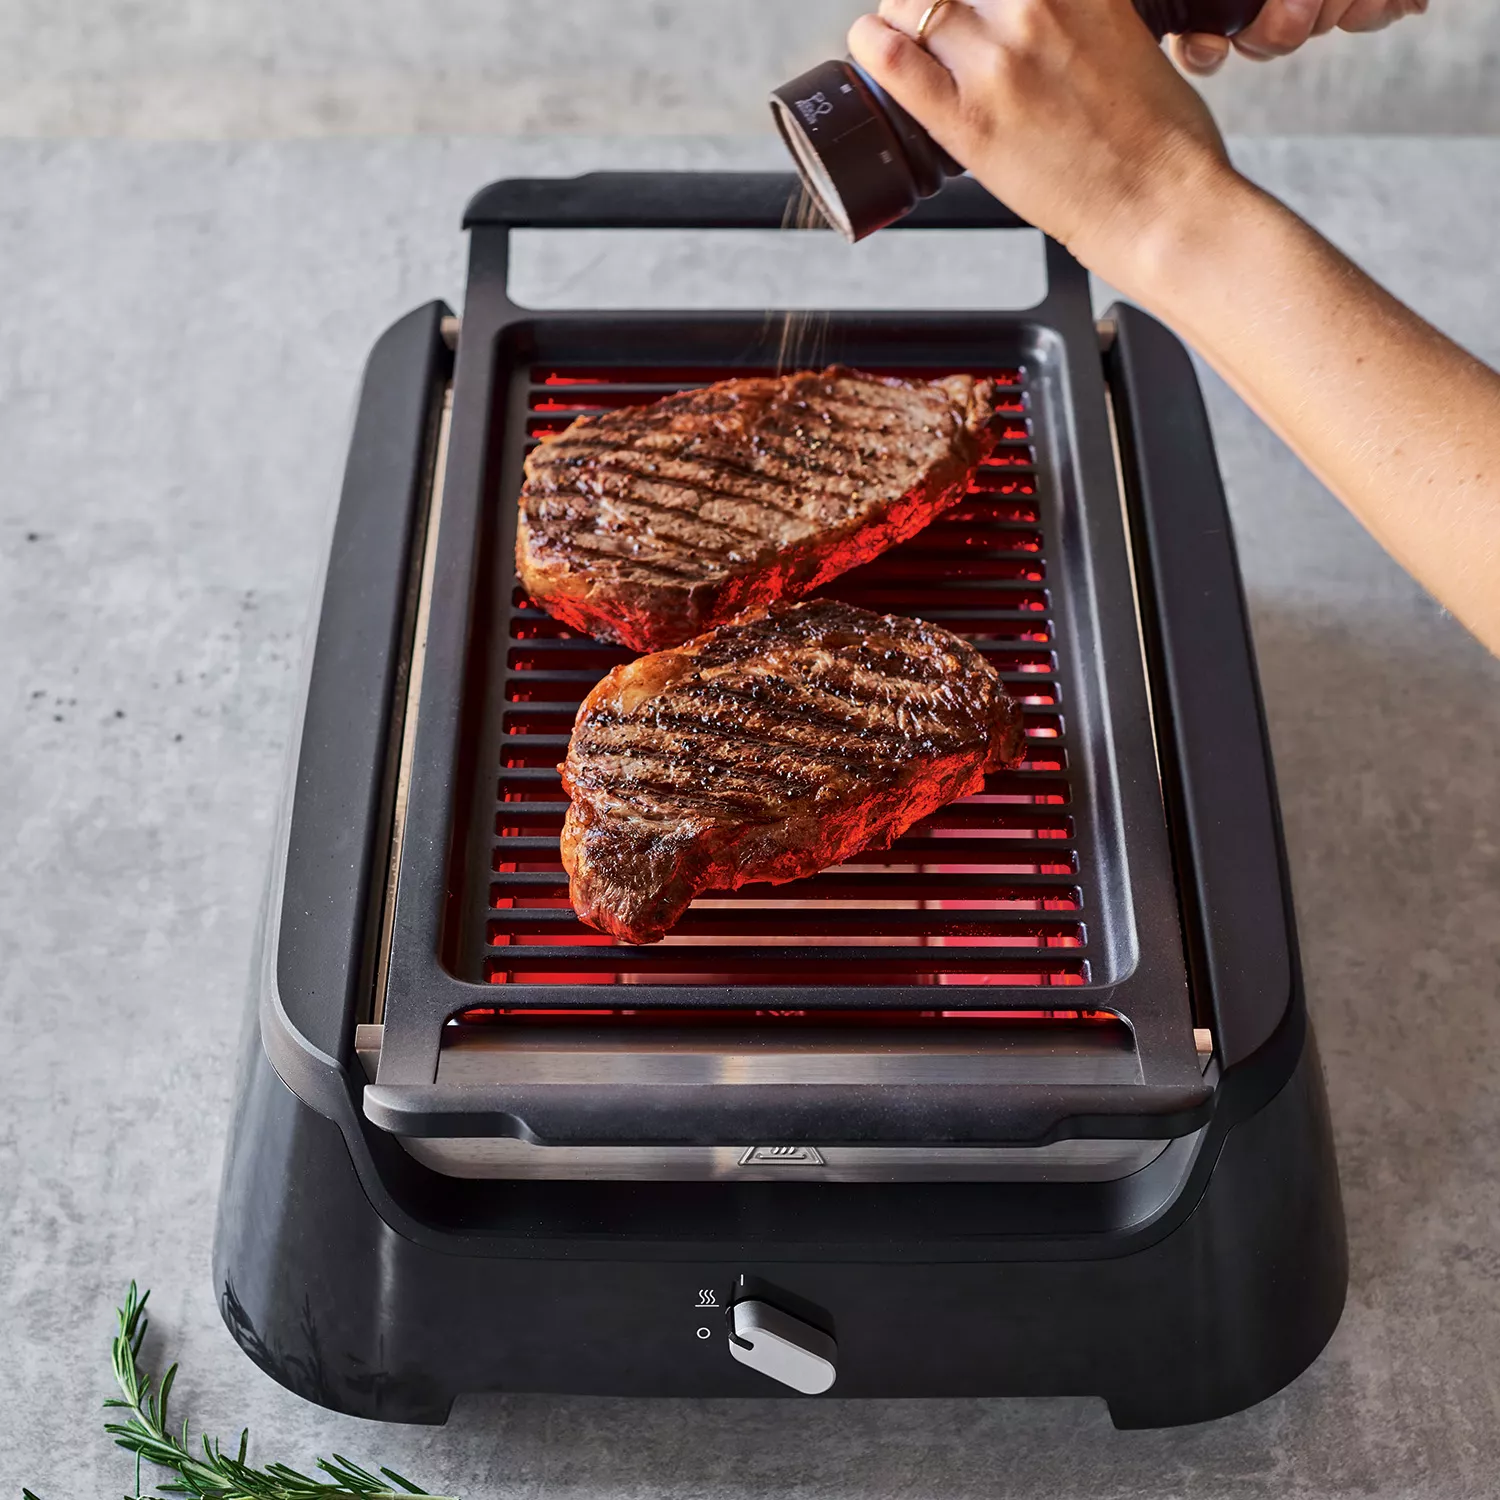 Grill smoke-free with Philips smokeless indoor grill, now 48% off  post-Prime Day